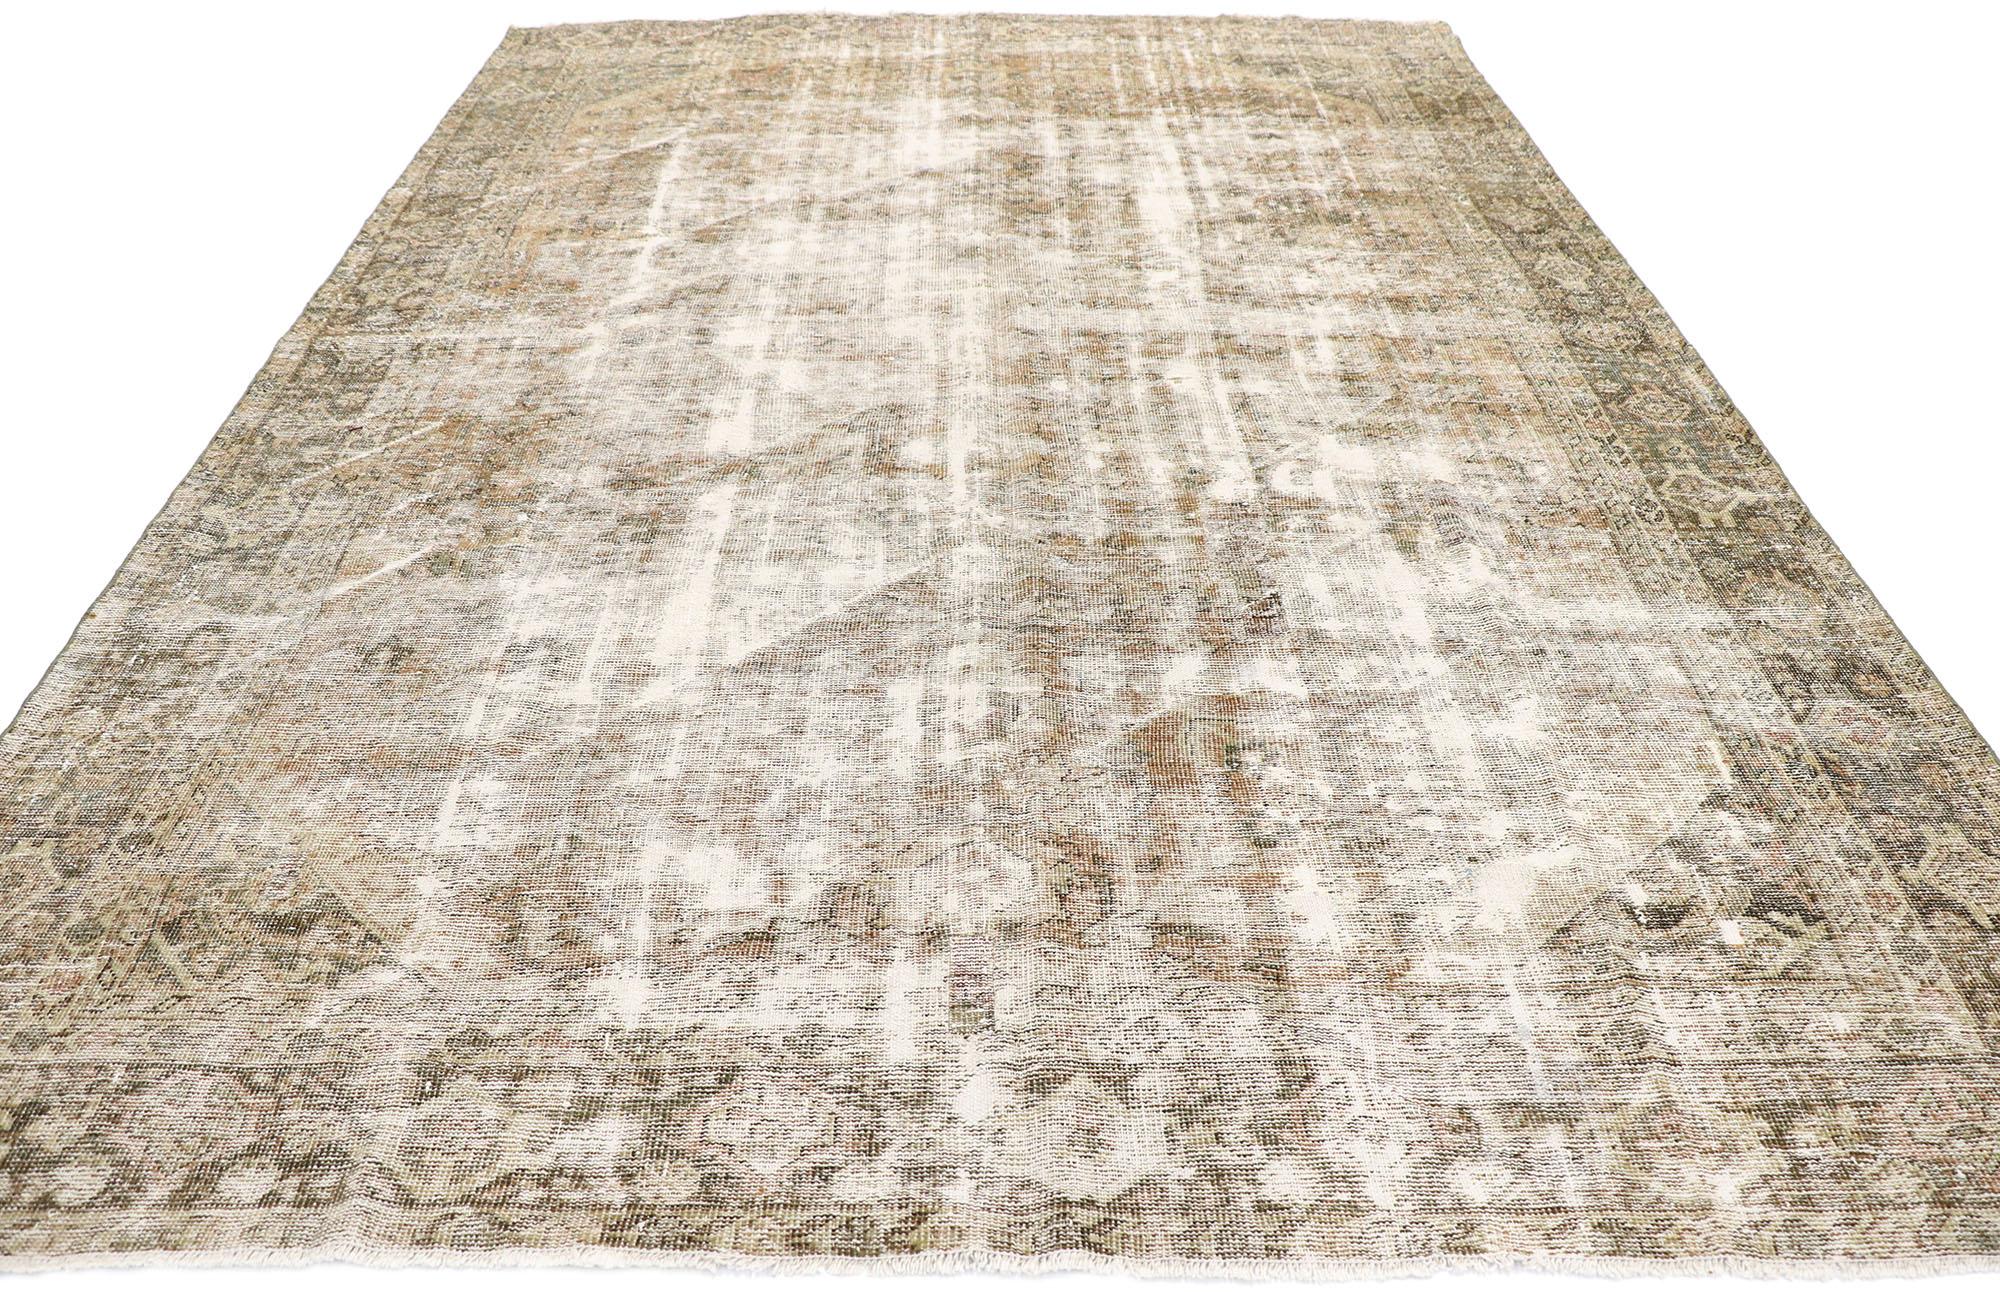 Tabriz Distressed Antique Persian Mahal Rug with Modern Rustic Style